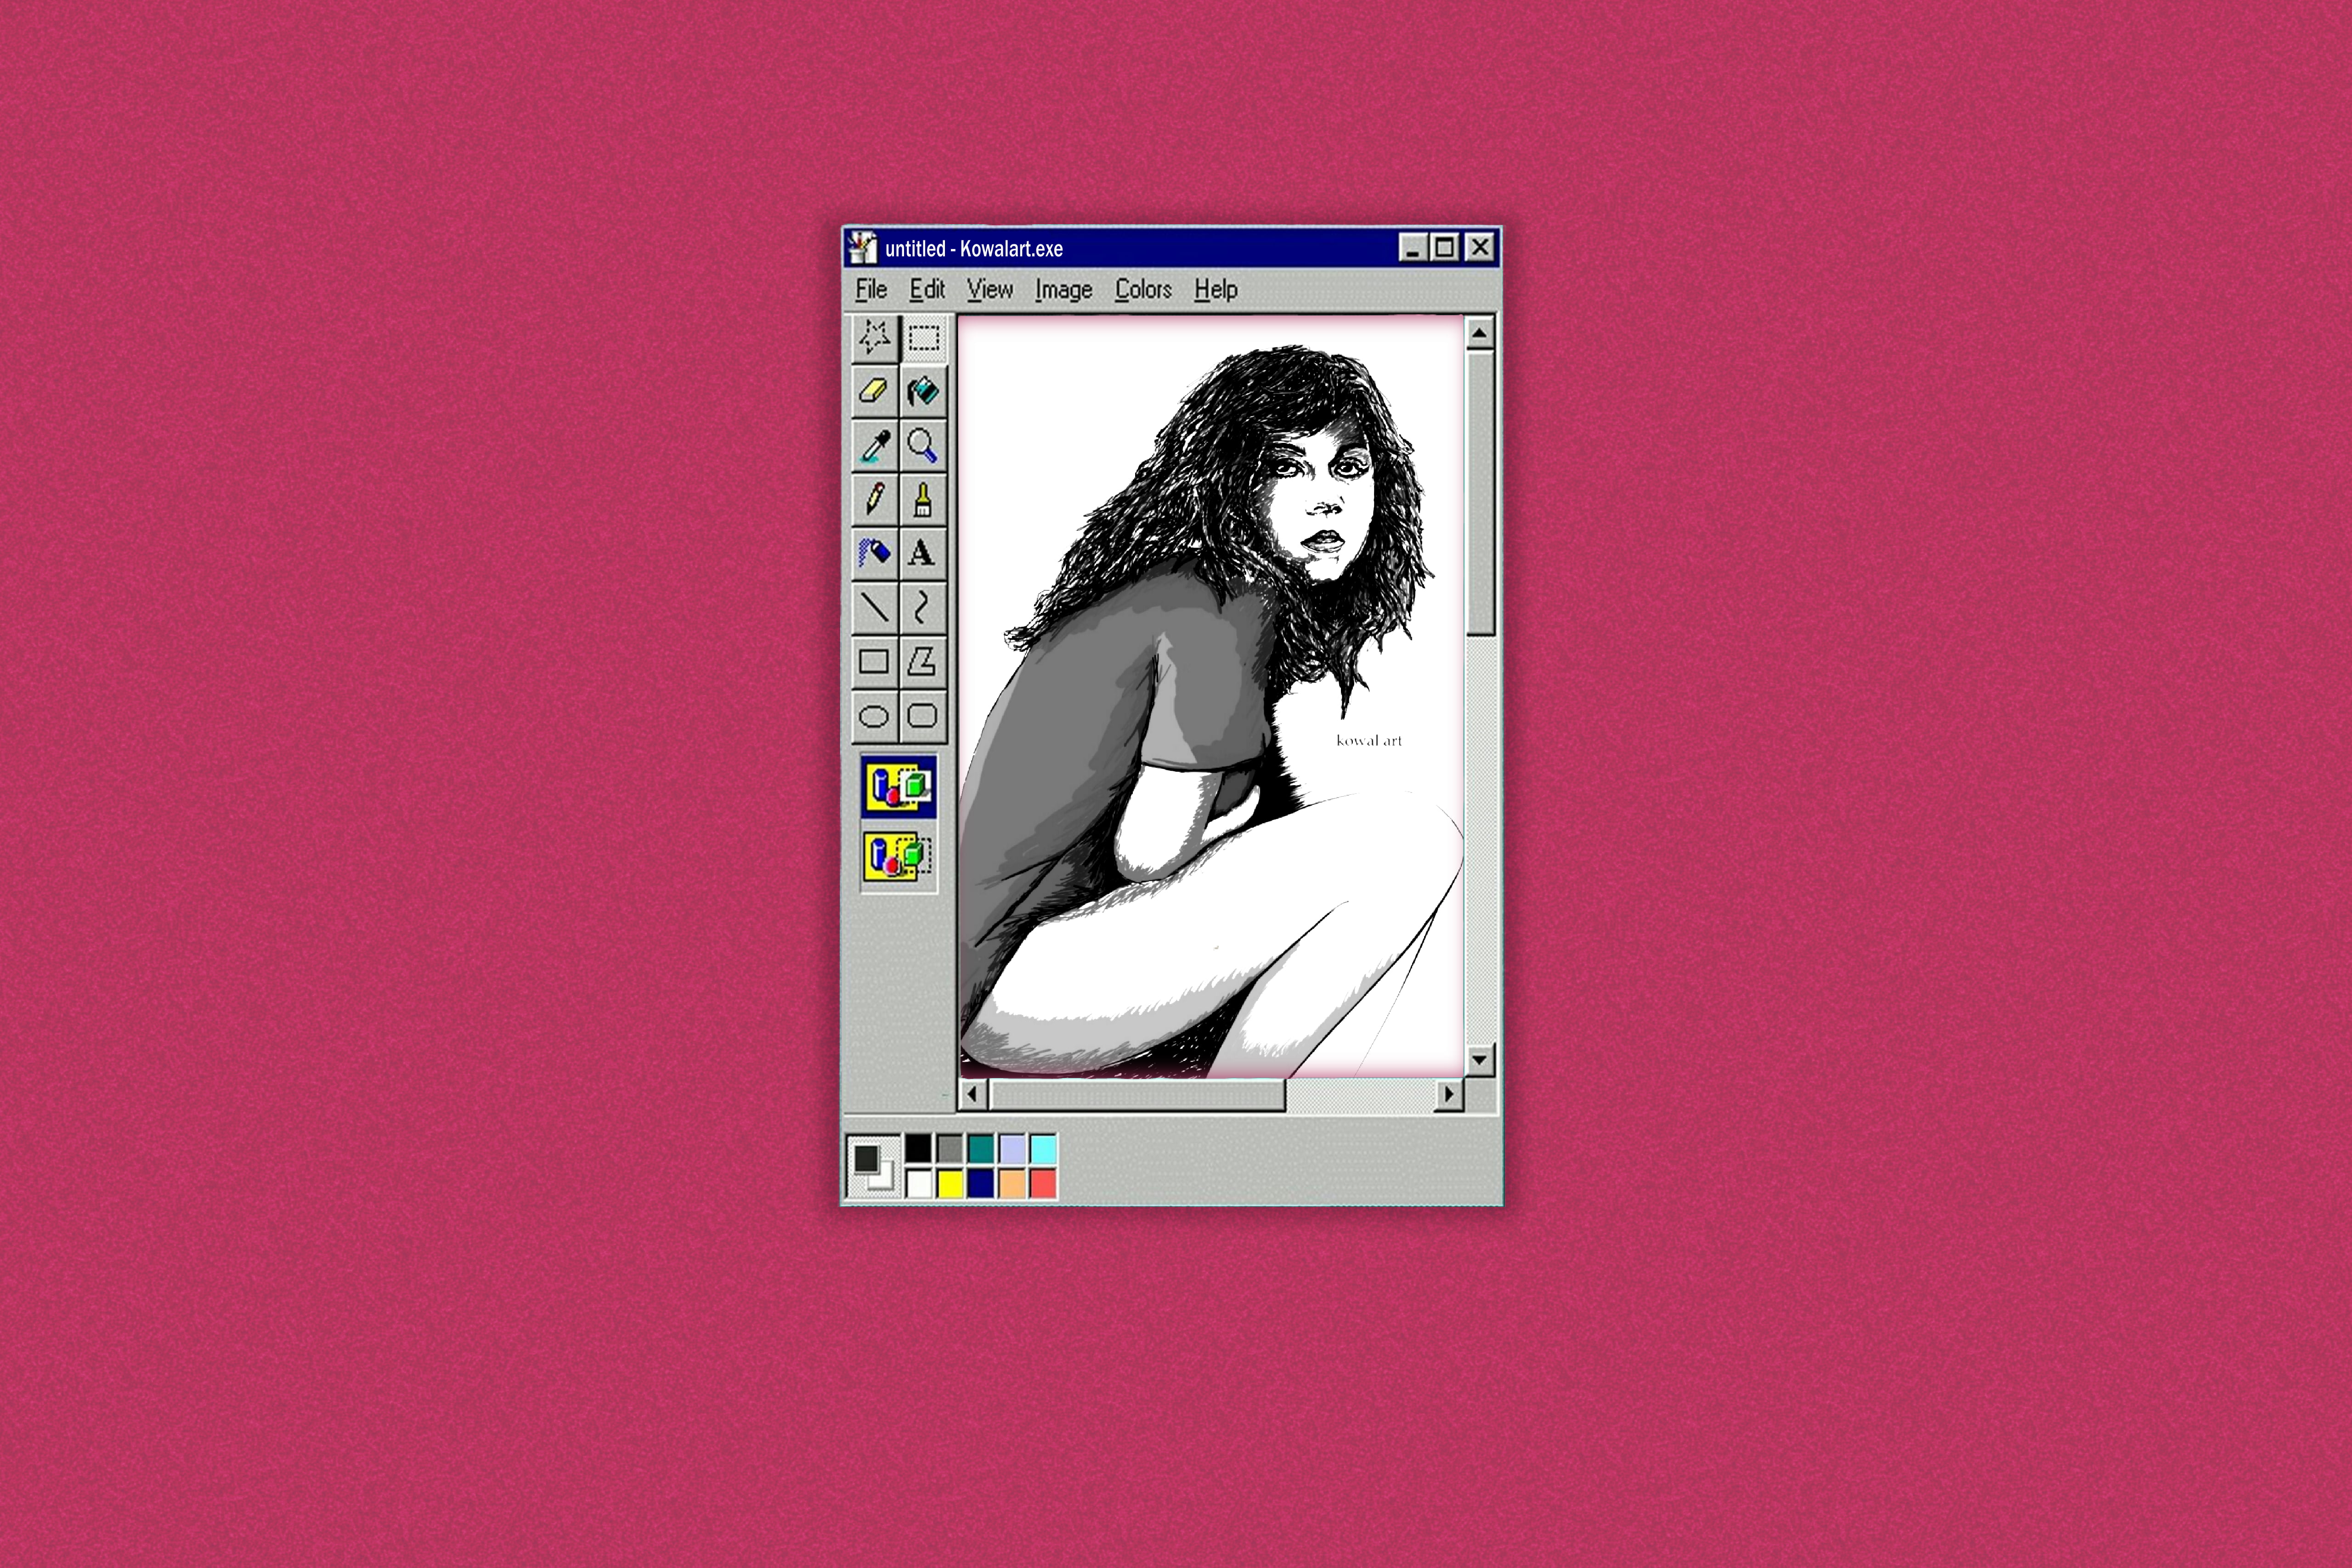 Windows 95, old games, legs, KowalArt, Jennette McCurdy, pink background